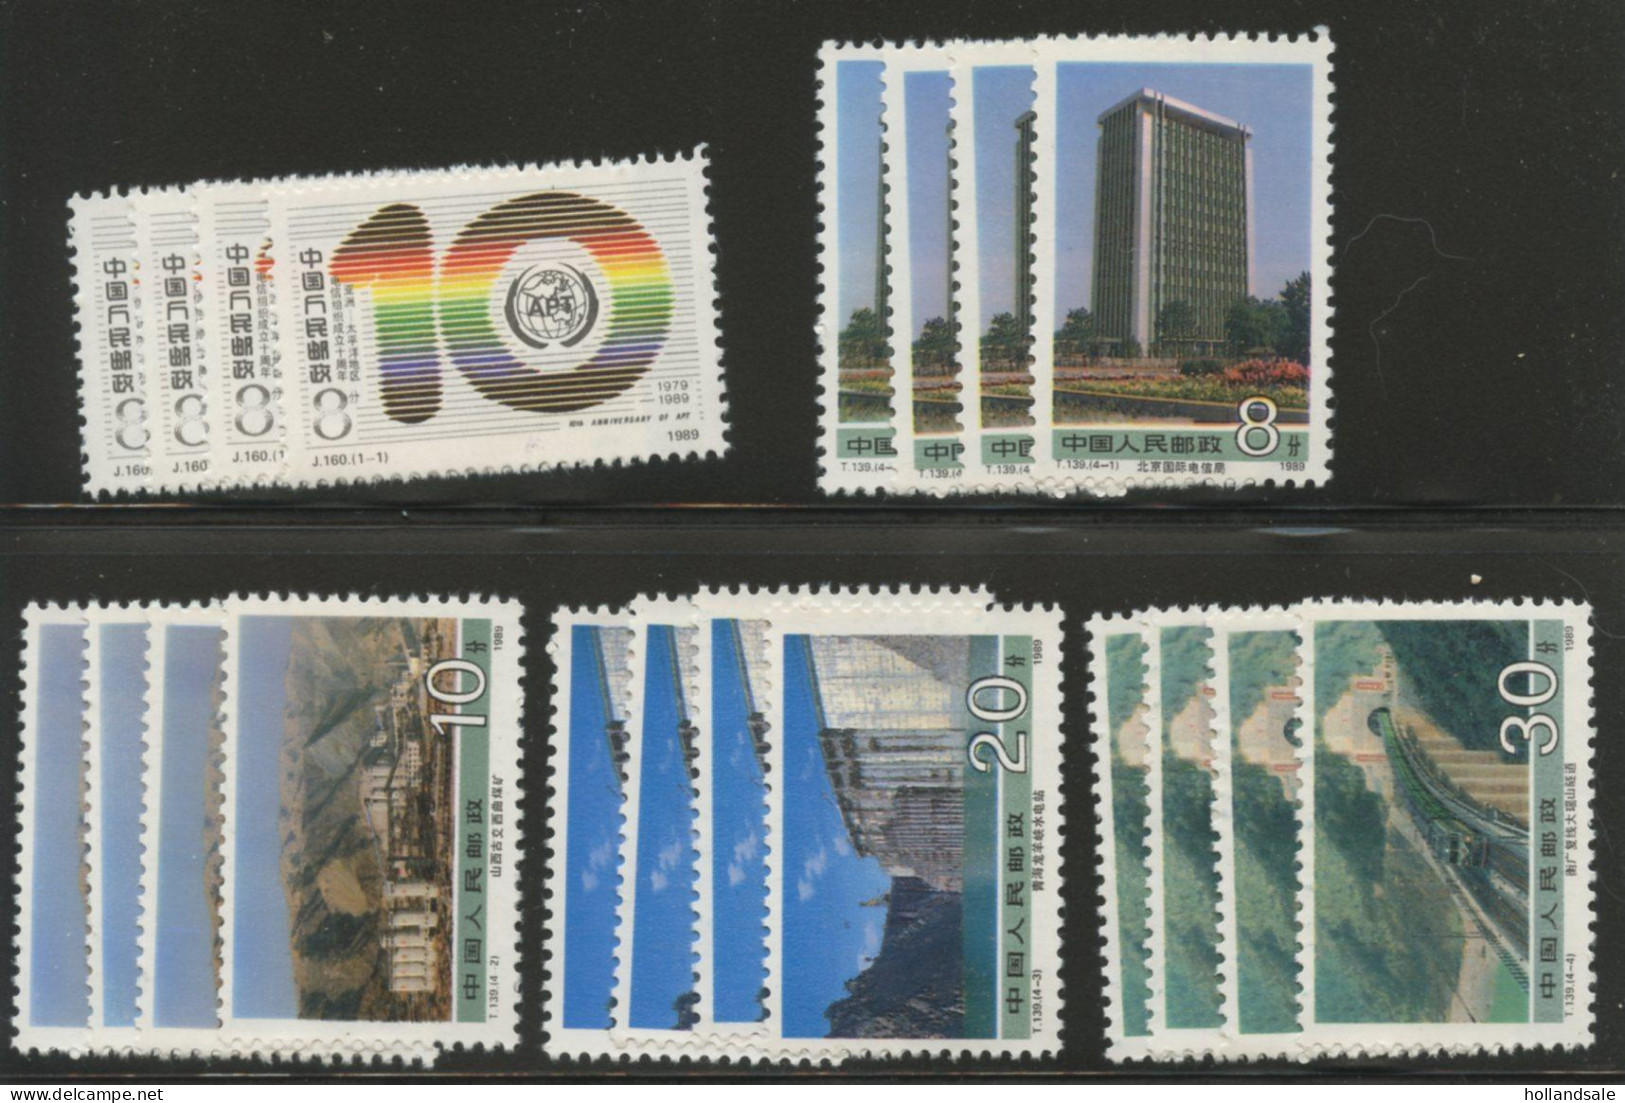 CHINA PRC - 1989 J160 MICHEL 2243 And T139 MICHEL 2244-2247. All Four (4) MNH Sets. - Unused Stamps